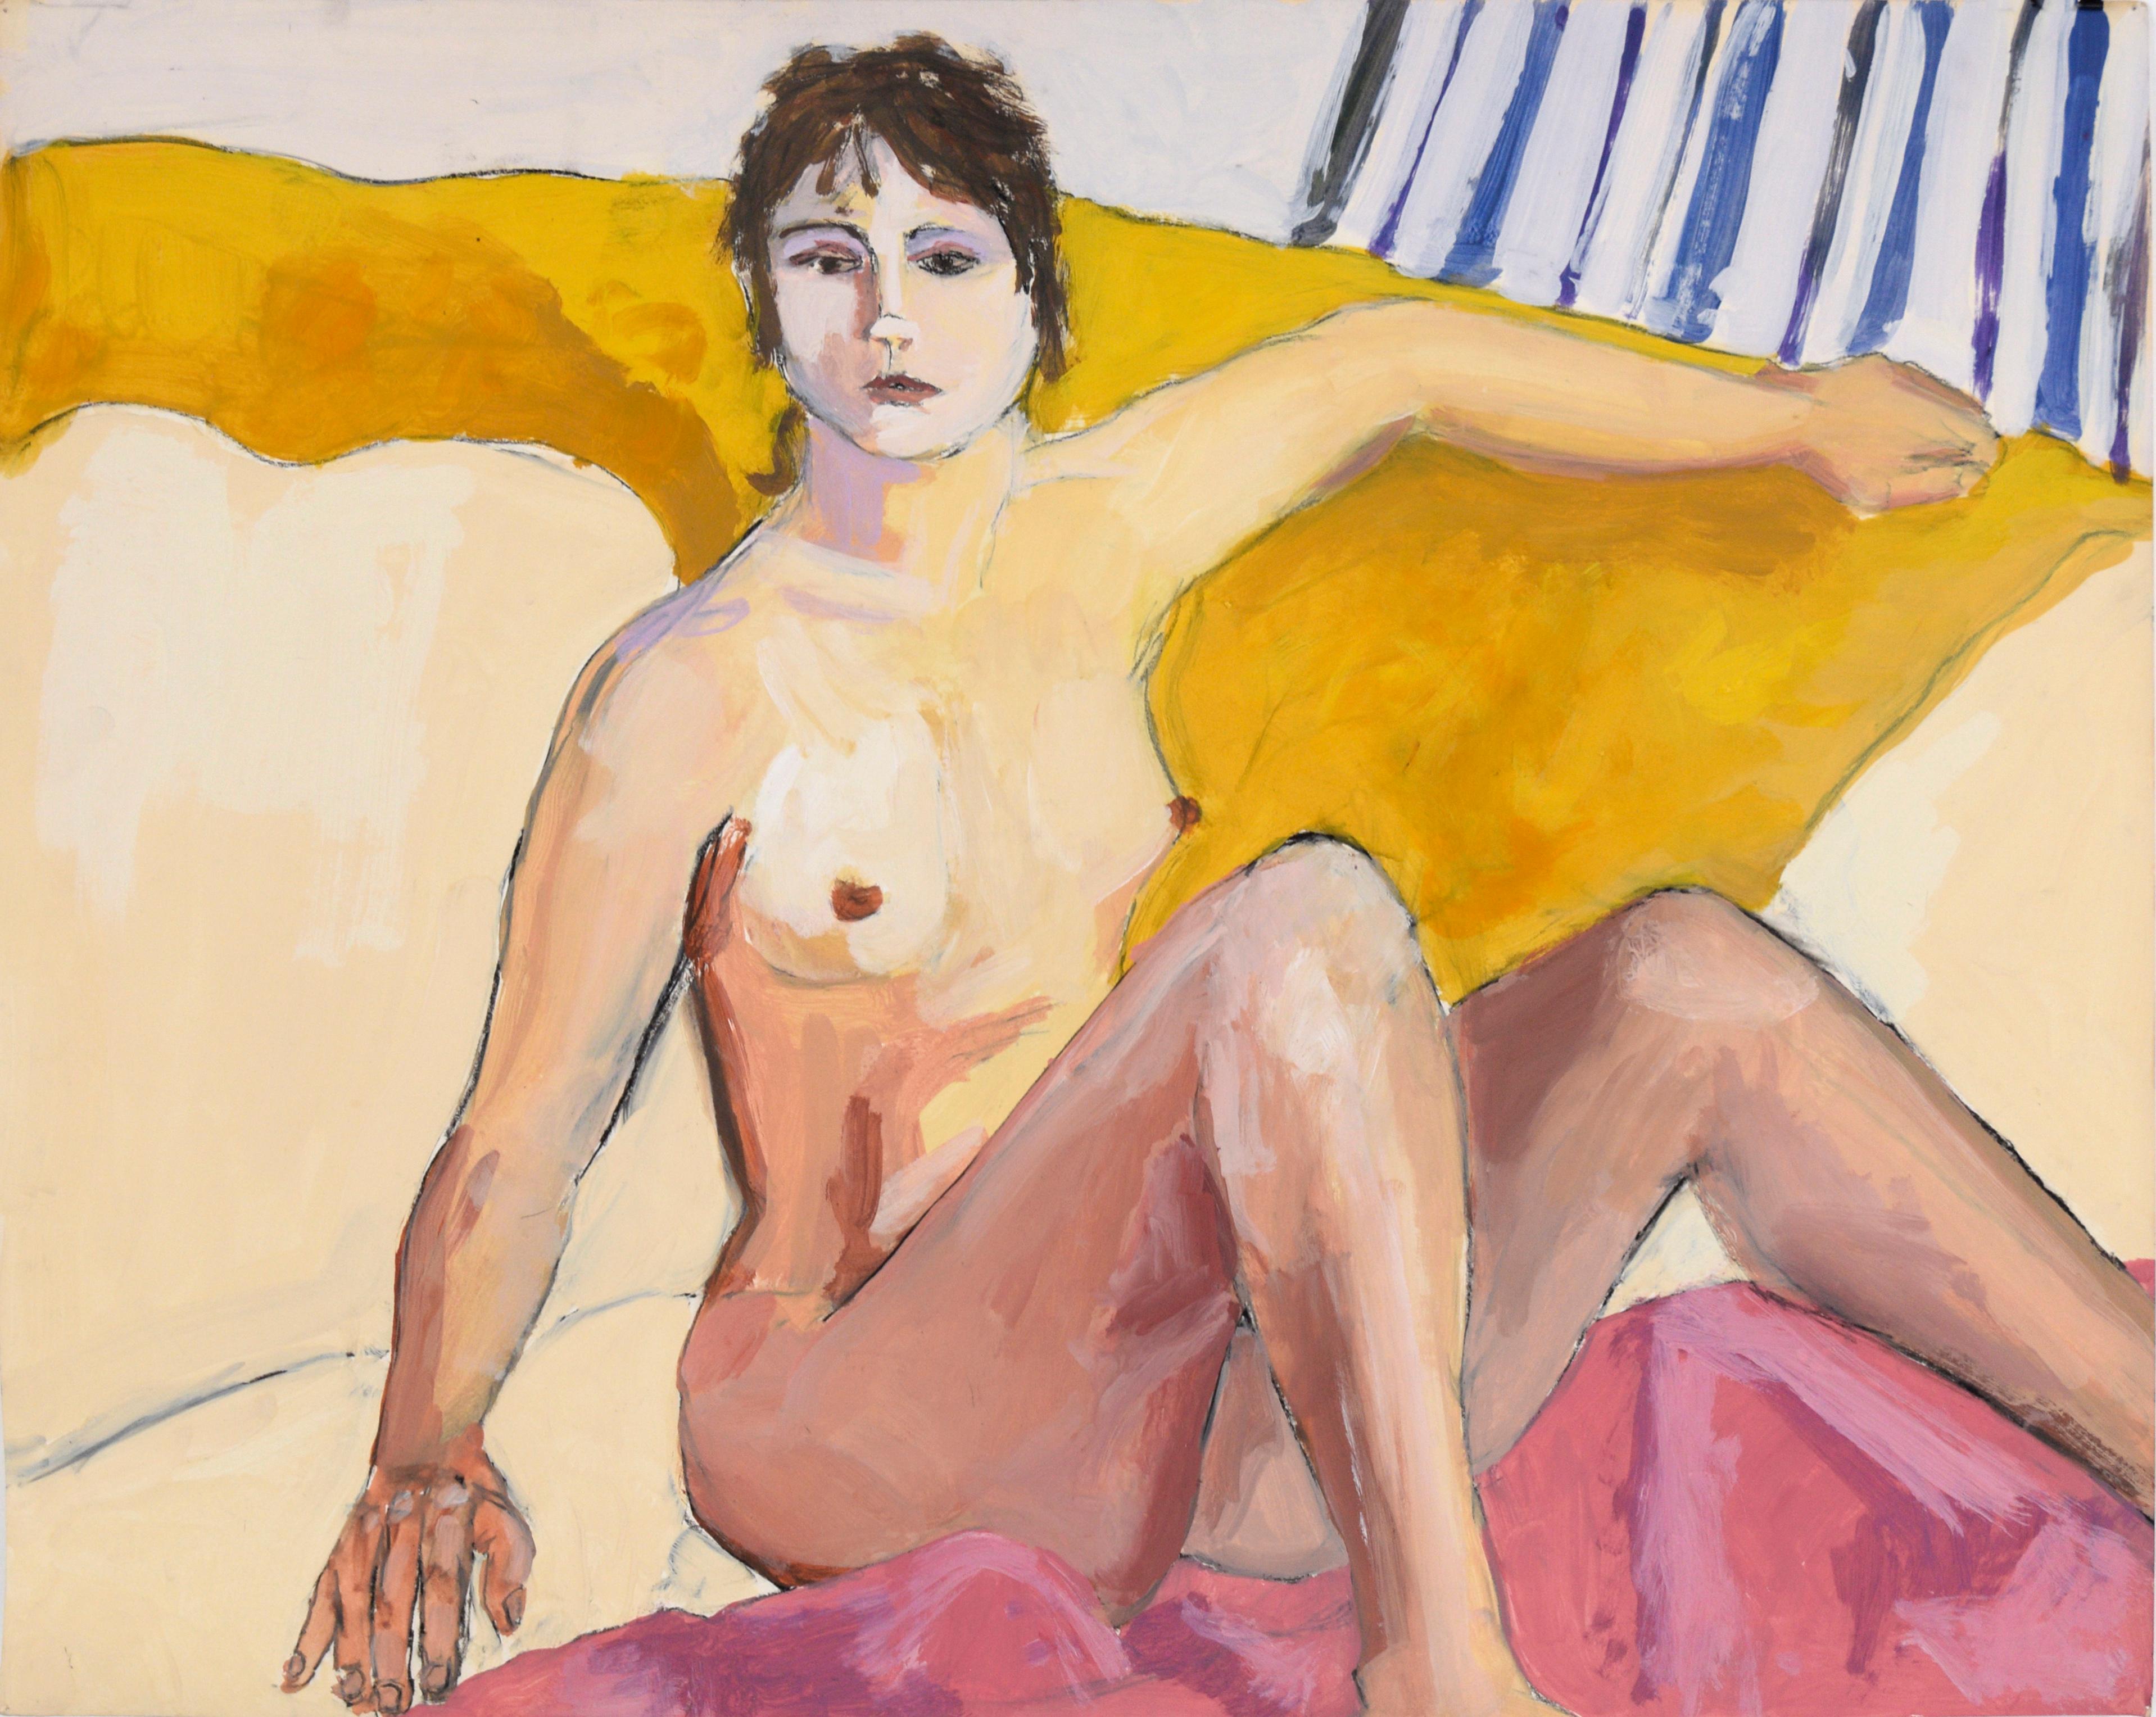 Katherine Kallick Nude Painting - Nude Woman on Yellow Couch in Acrylic on Paper